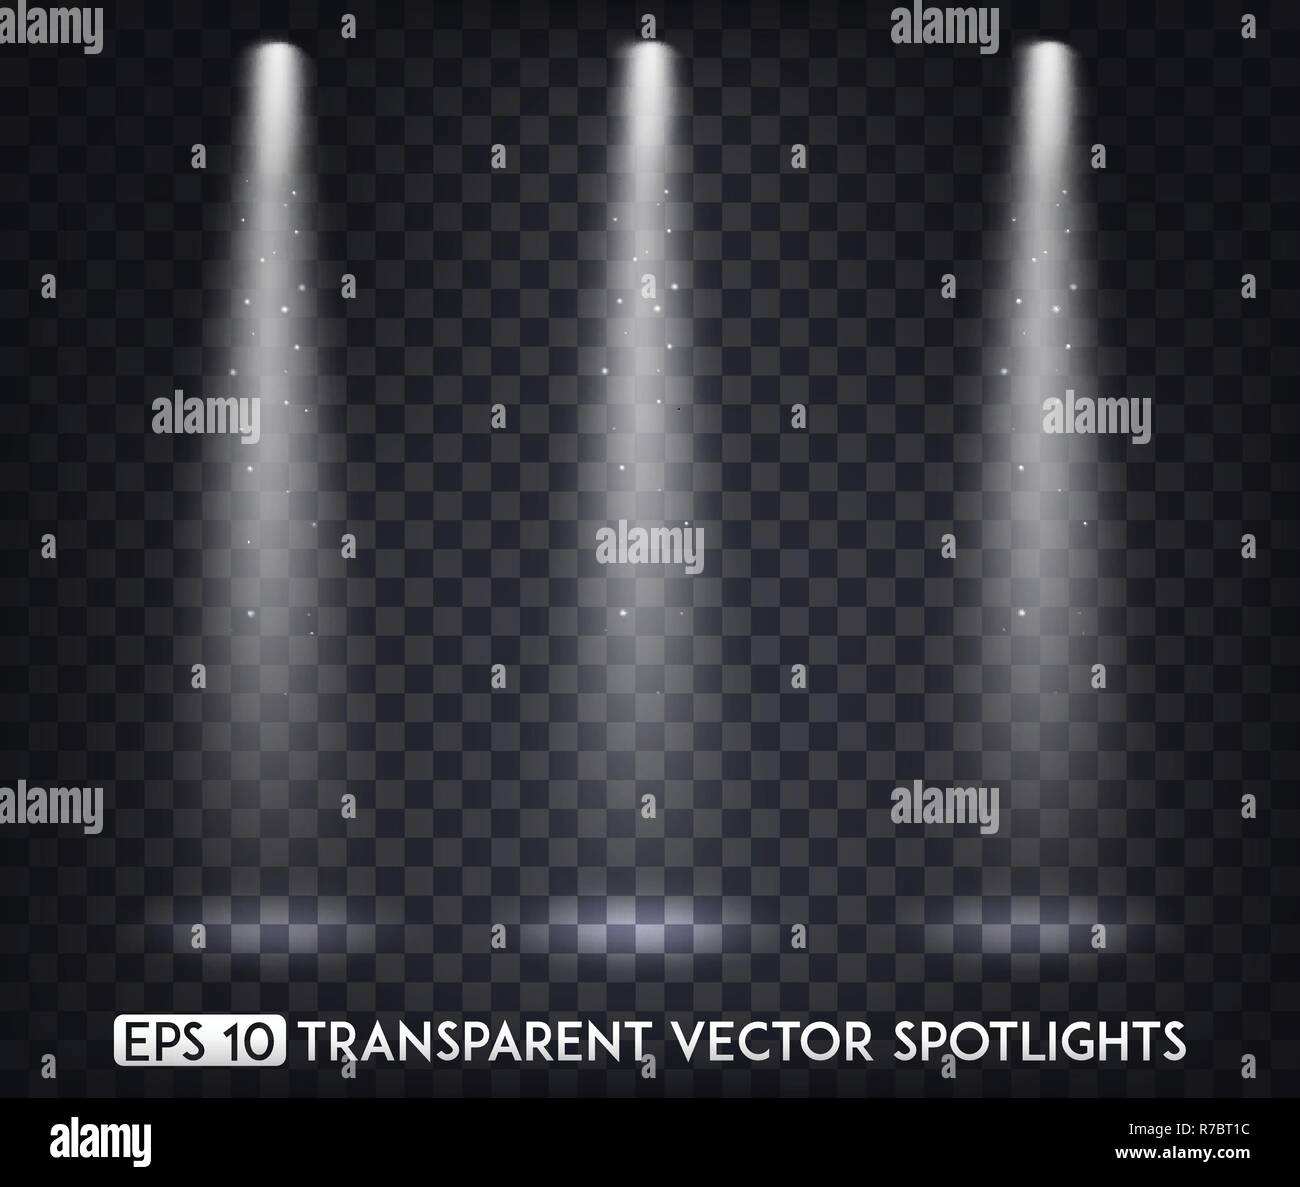 White Transparent Vector Spot Lights / Spotlights Effect For Party, Scene, Stage, Gallery or Holiday Design Stock Vector